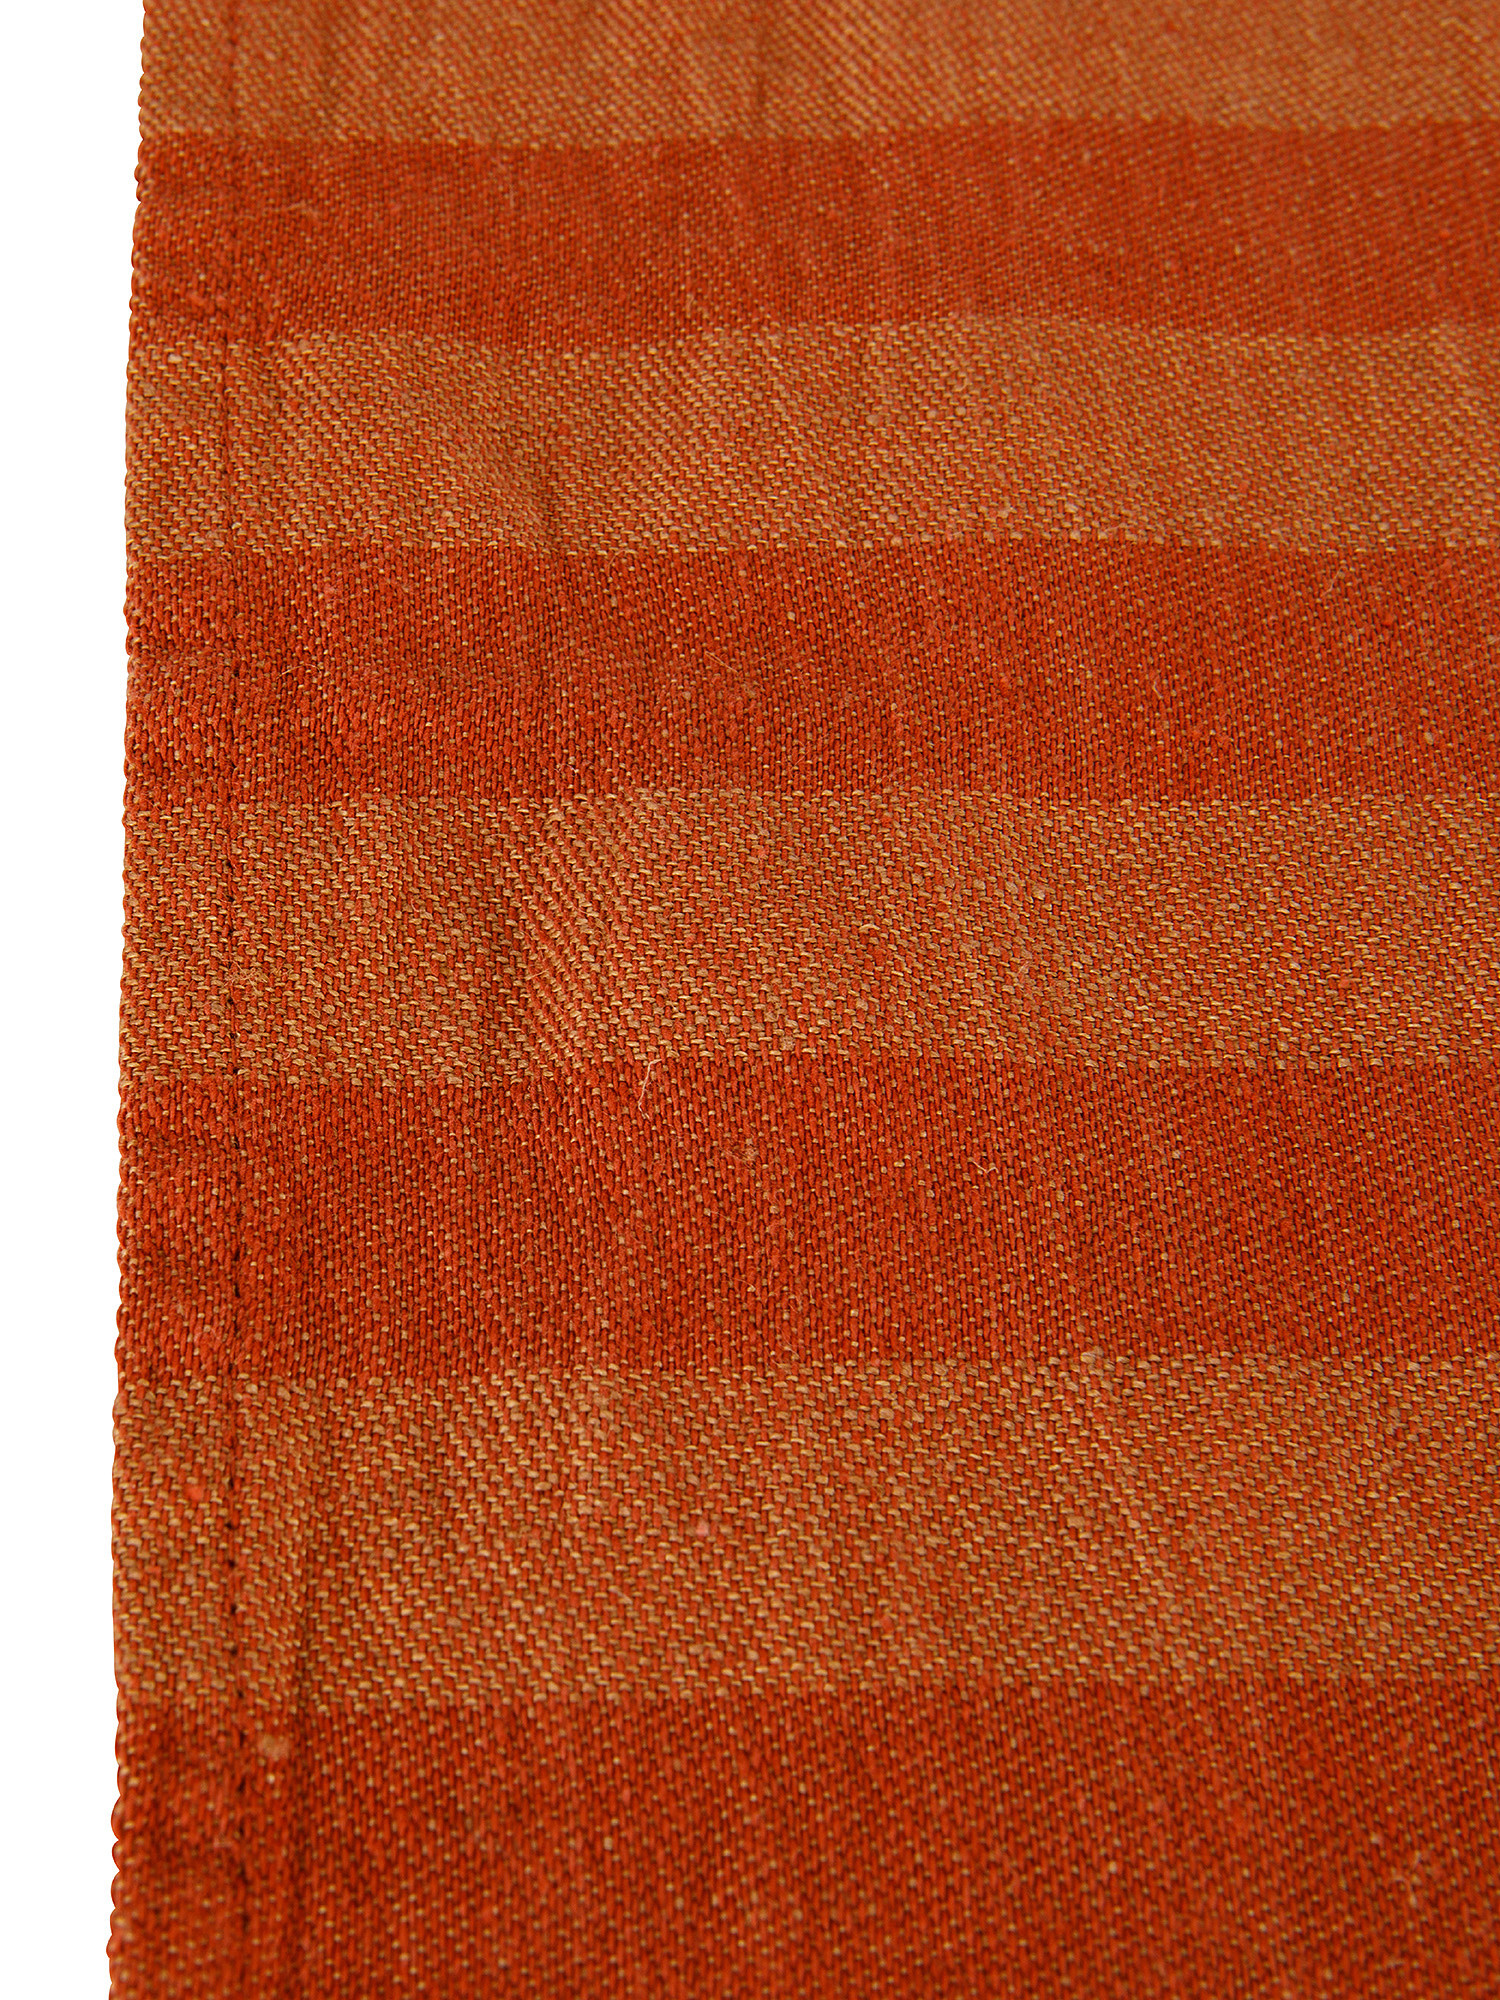 Striped linen and cotton table runner, Brown, large image number 1